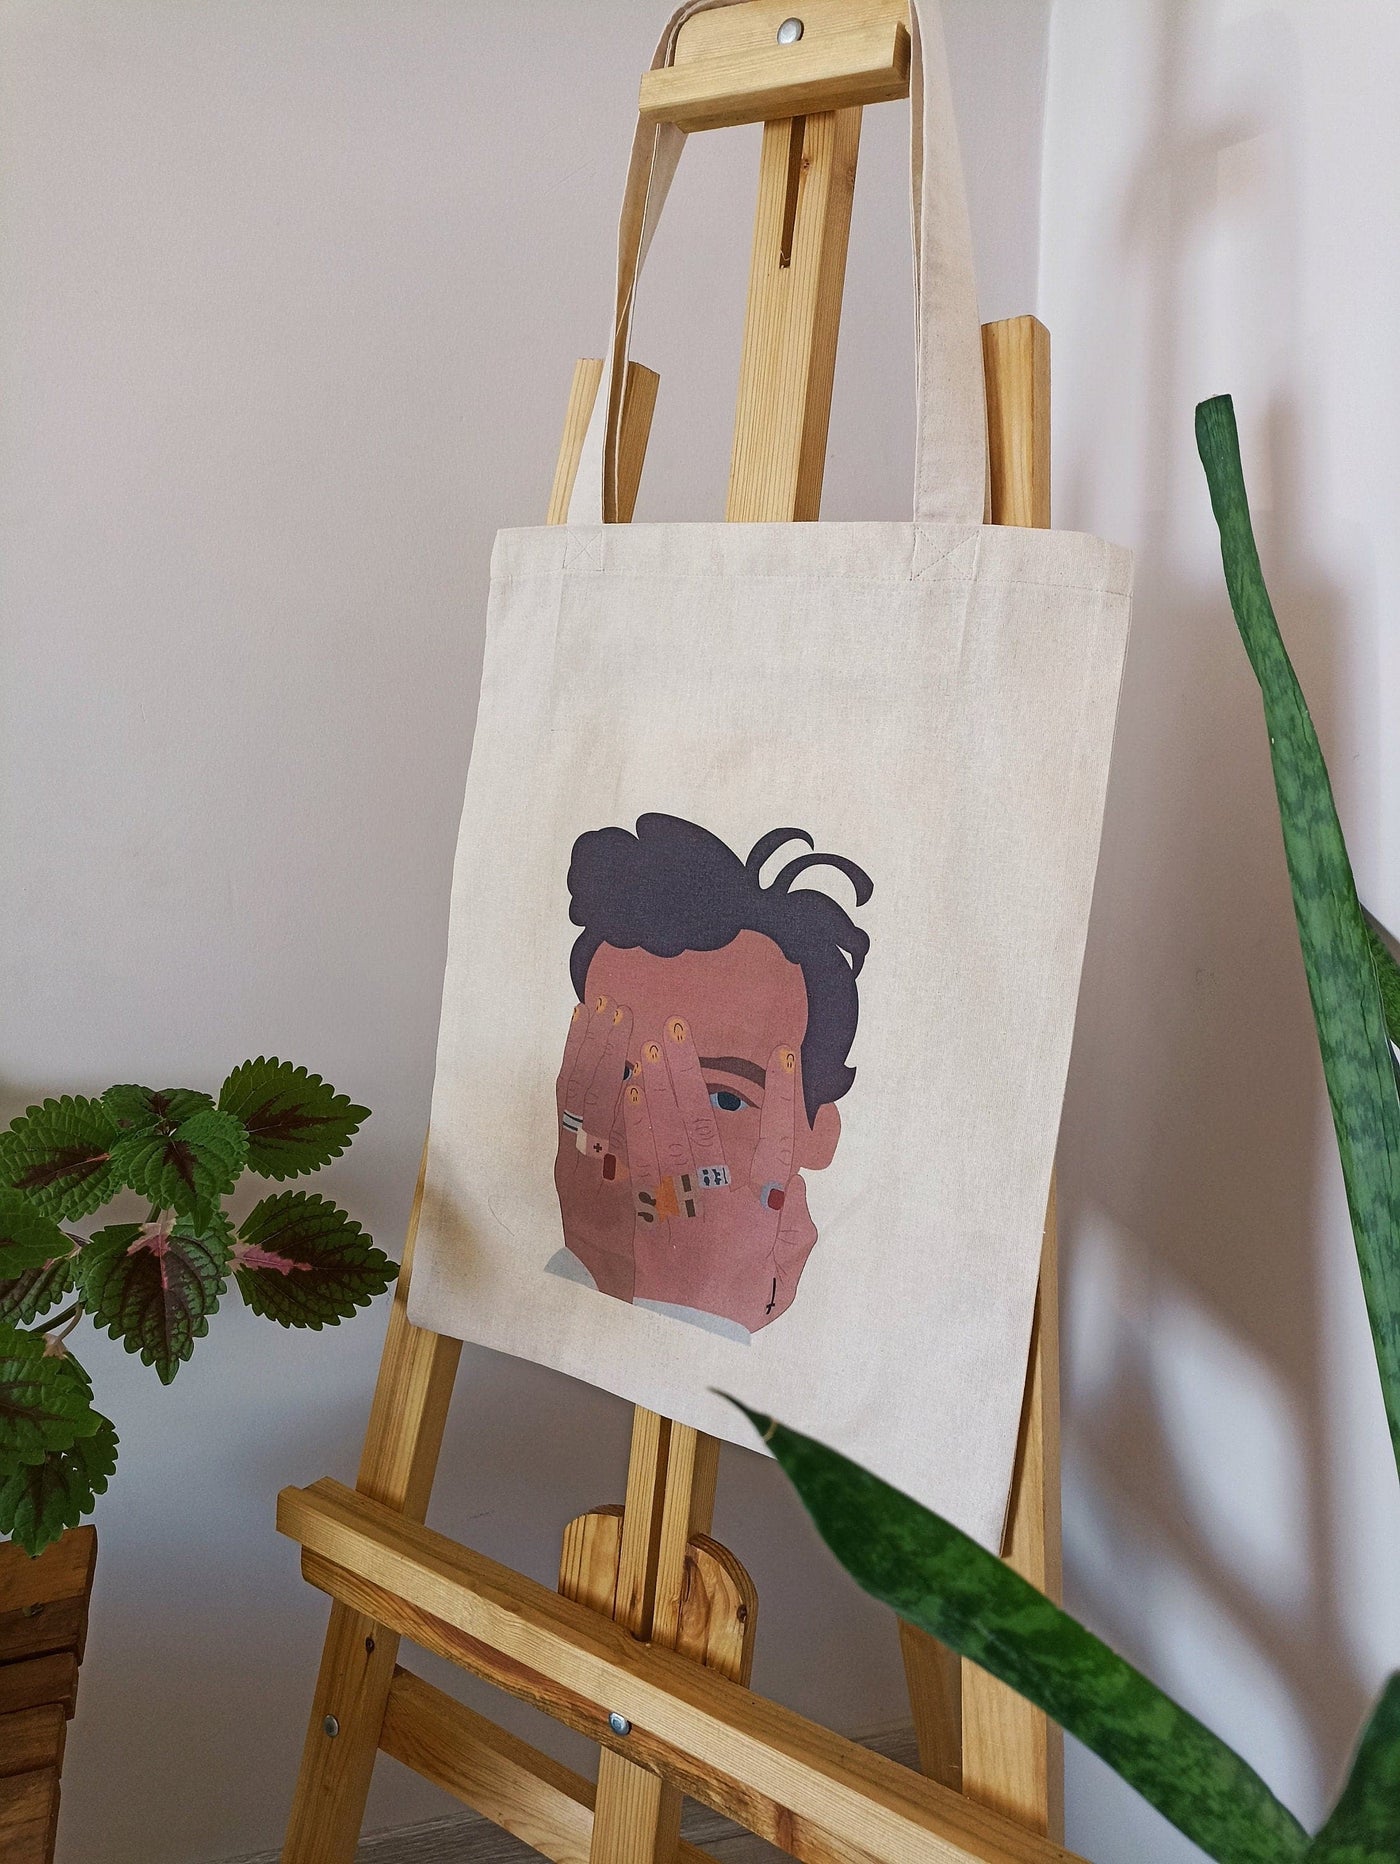 Harry Styles Vogue Tote Bag, Illustration Tote, Harry Styles Merch, Harry Styles Purse Bag